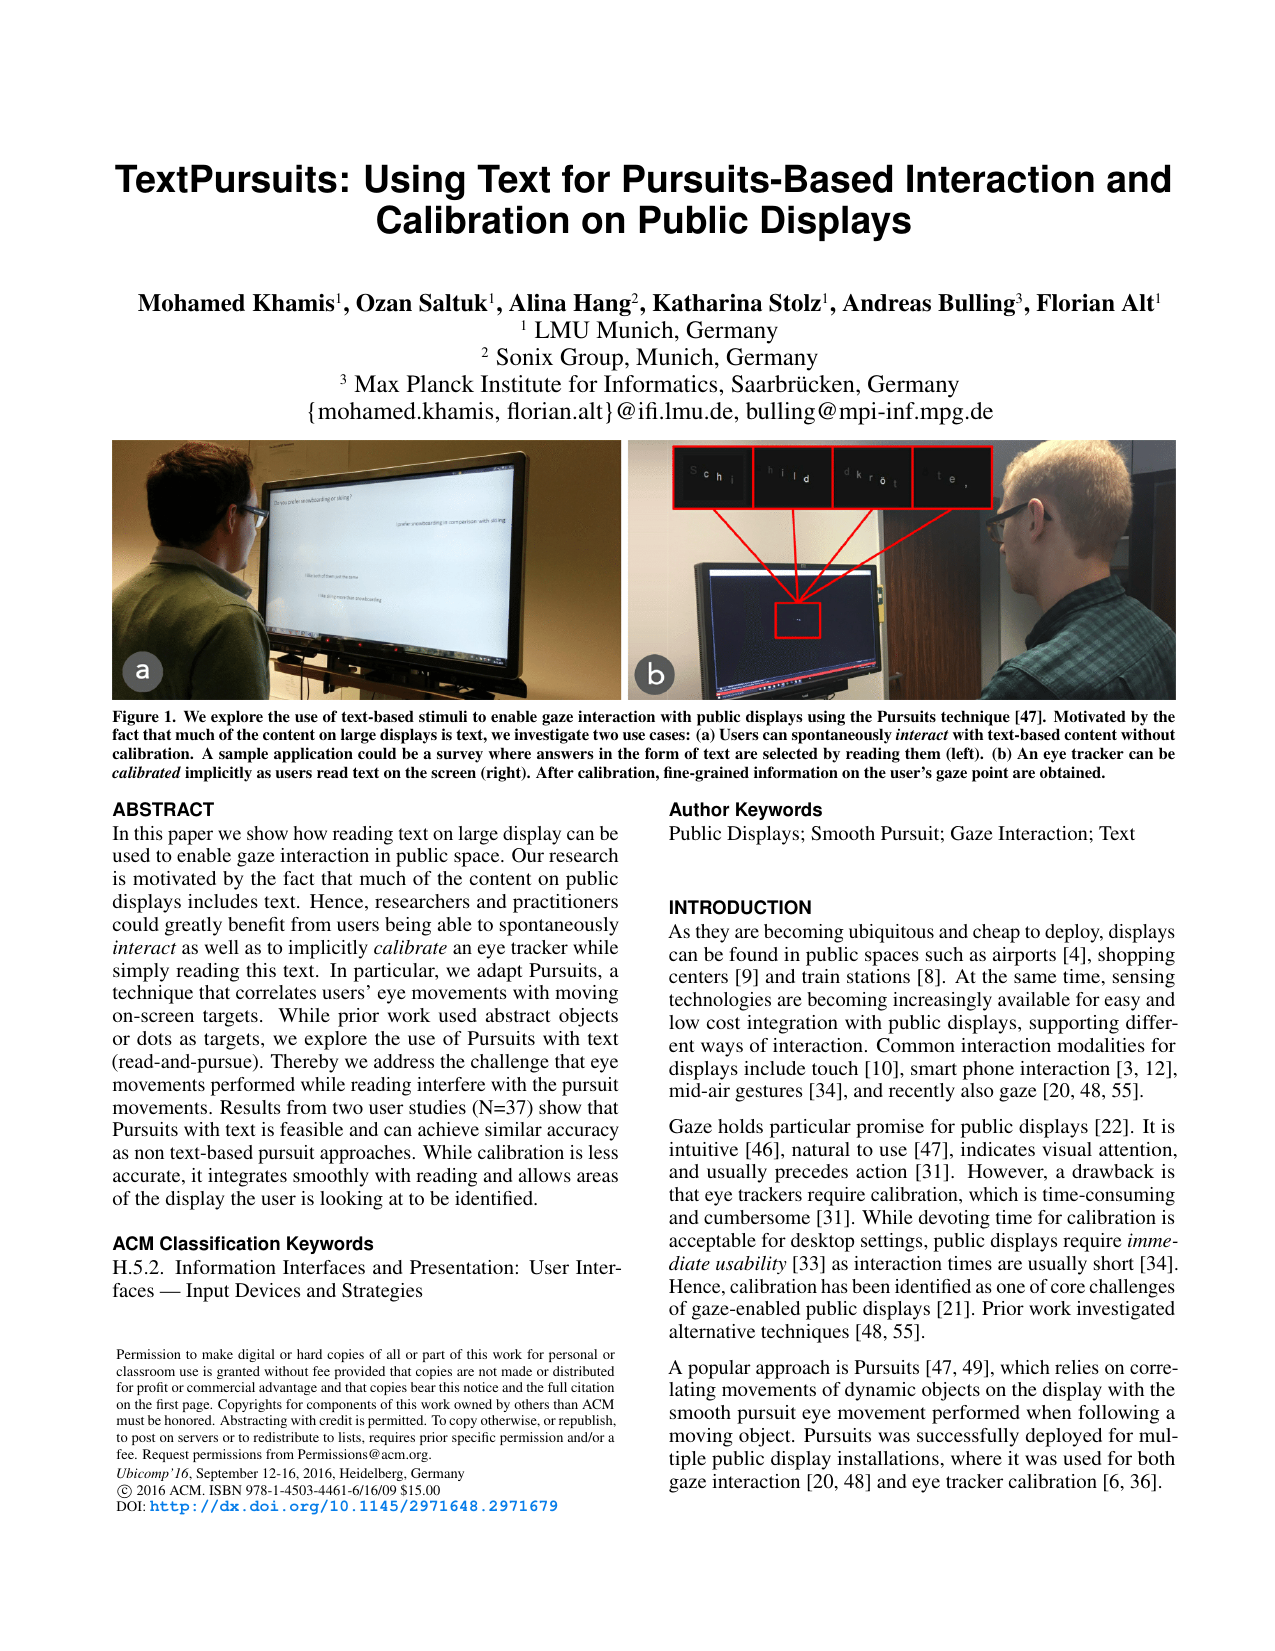 TextPursuits: Using Text for Pursuits-Based Interaction and Calibration on Public Displays